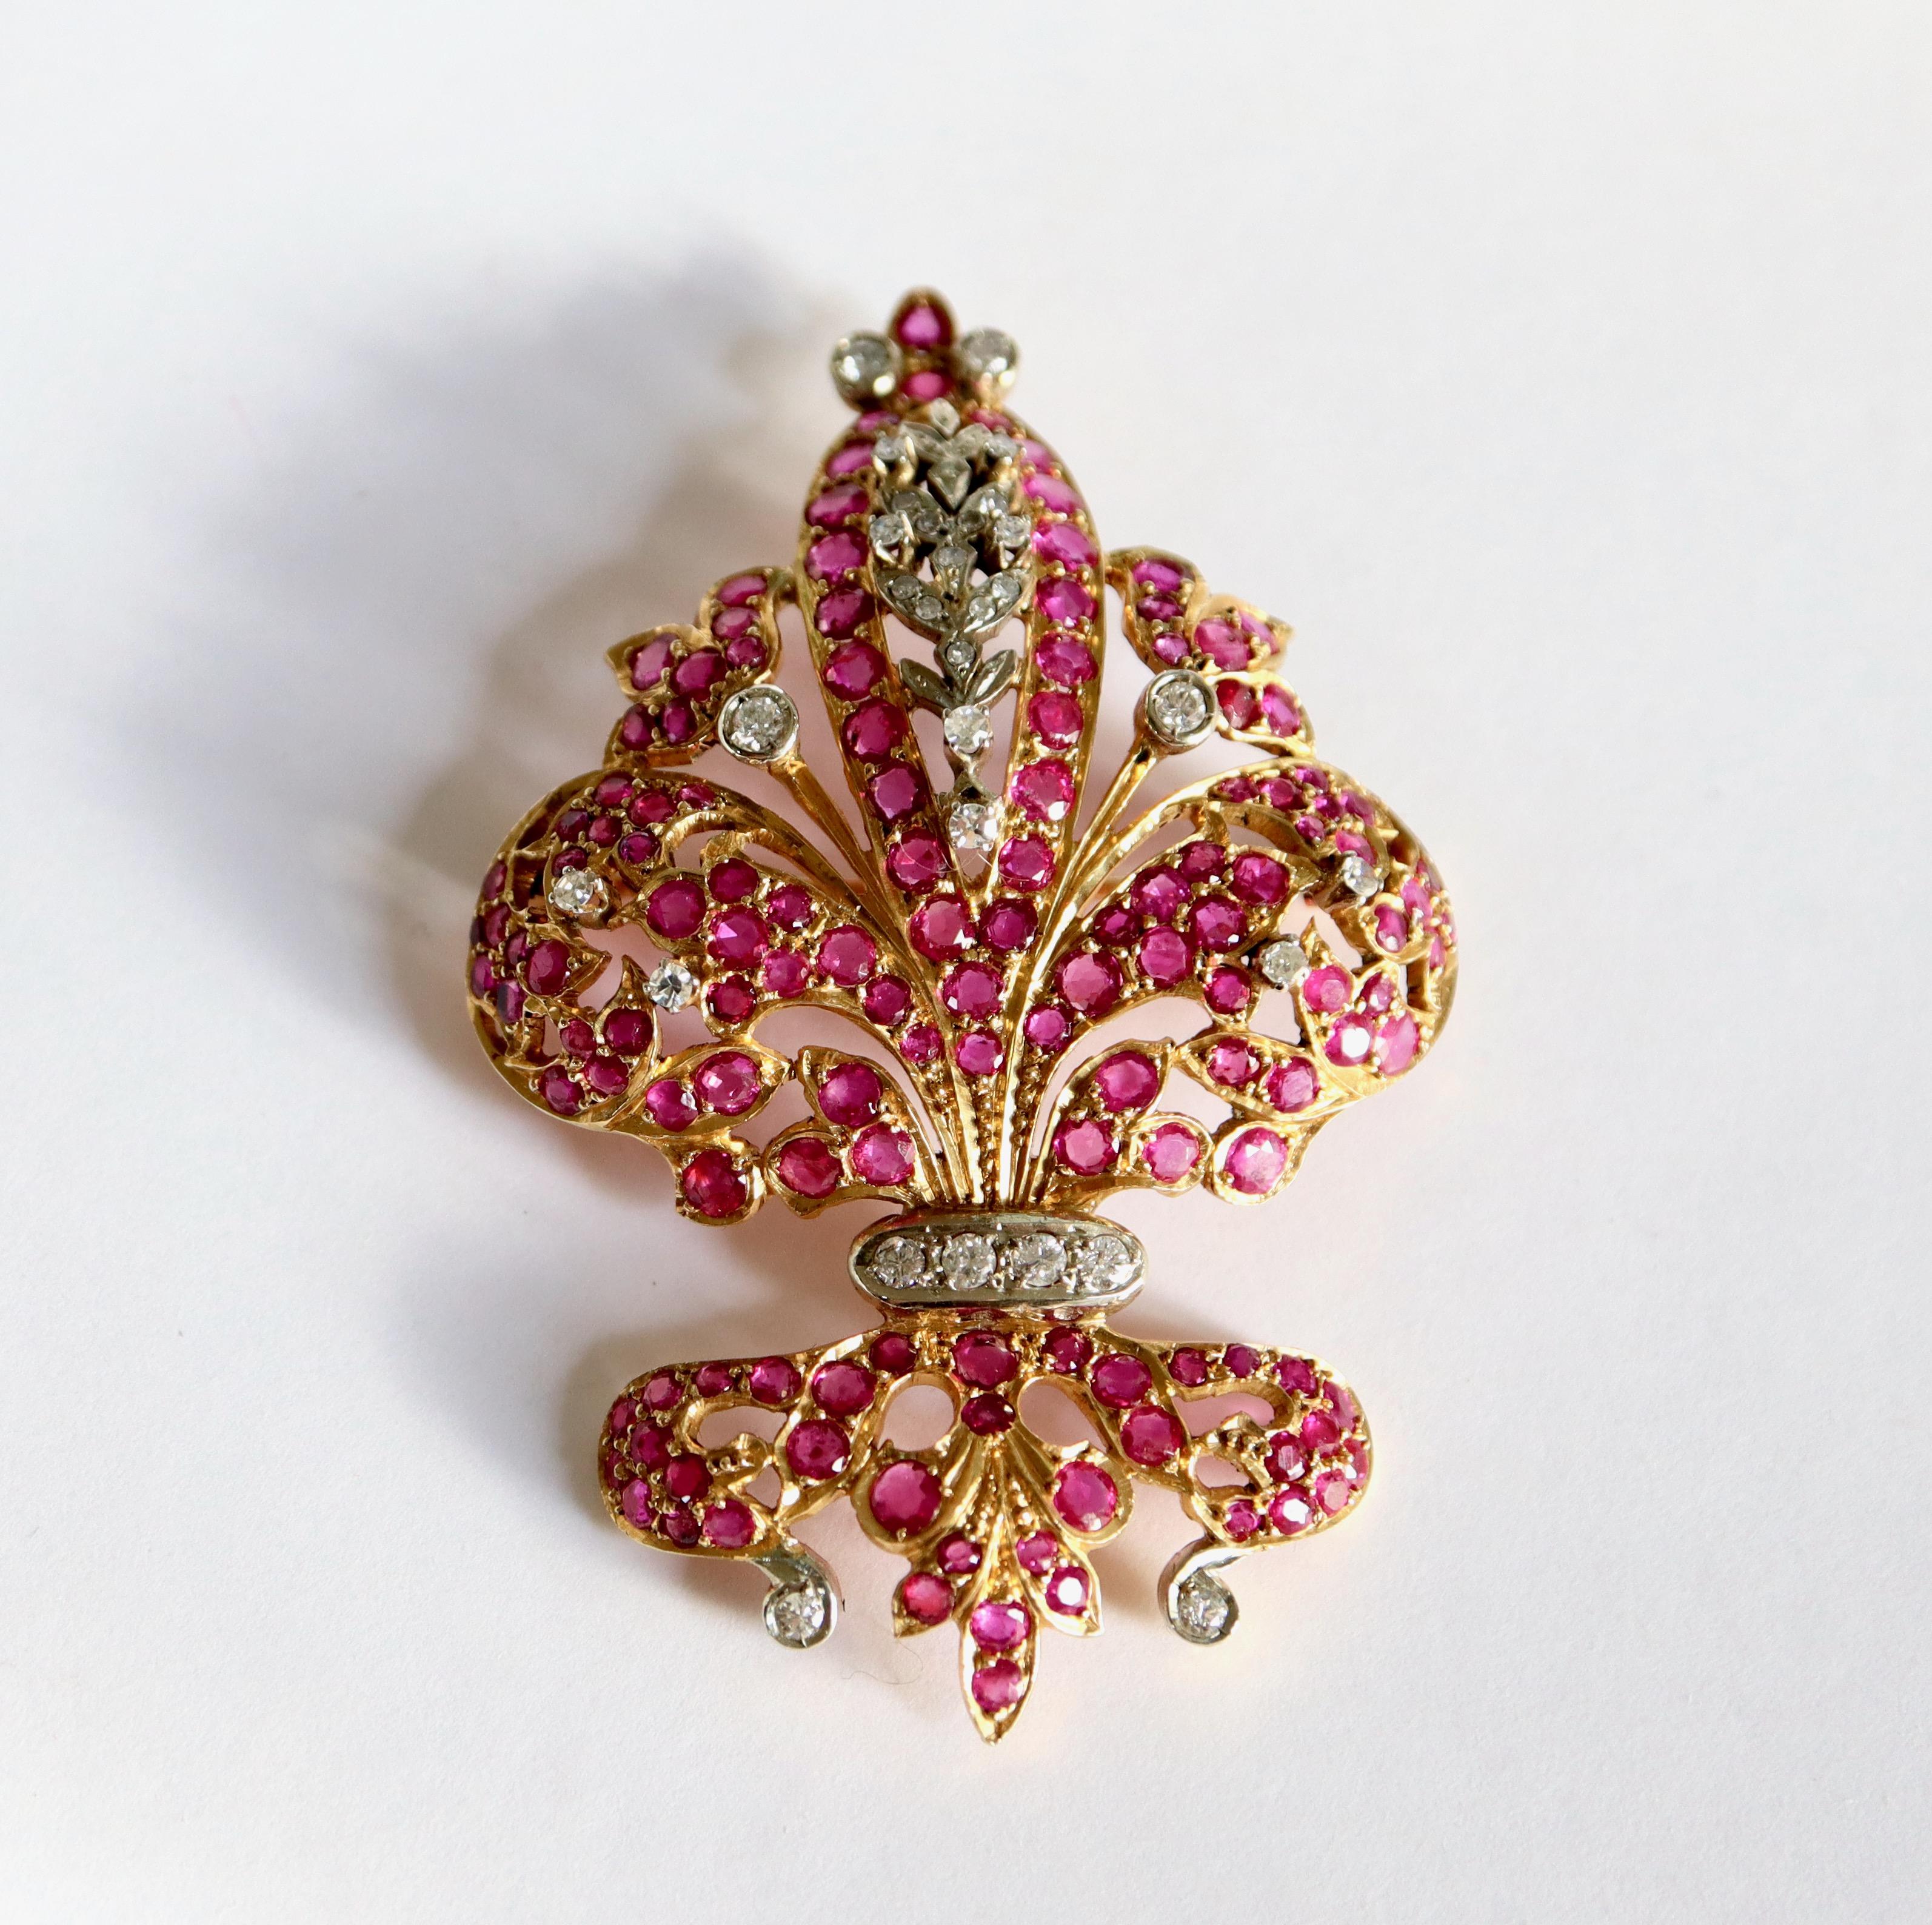 Heraldic Lily brooch in 18 kt gold, rubies and diamonds.
Brooch holding a fleur-de-lys design punctuated with a pavé of rubies and brilliant-cut and 8/8 diamonds. Setting in 18K yellow gold and white gold. Dimensions: 6.7 x 4.4 cm. Gross weight: